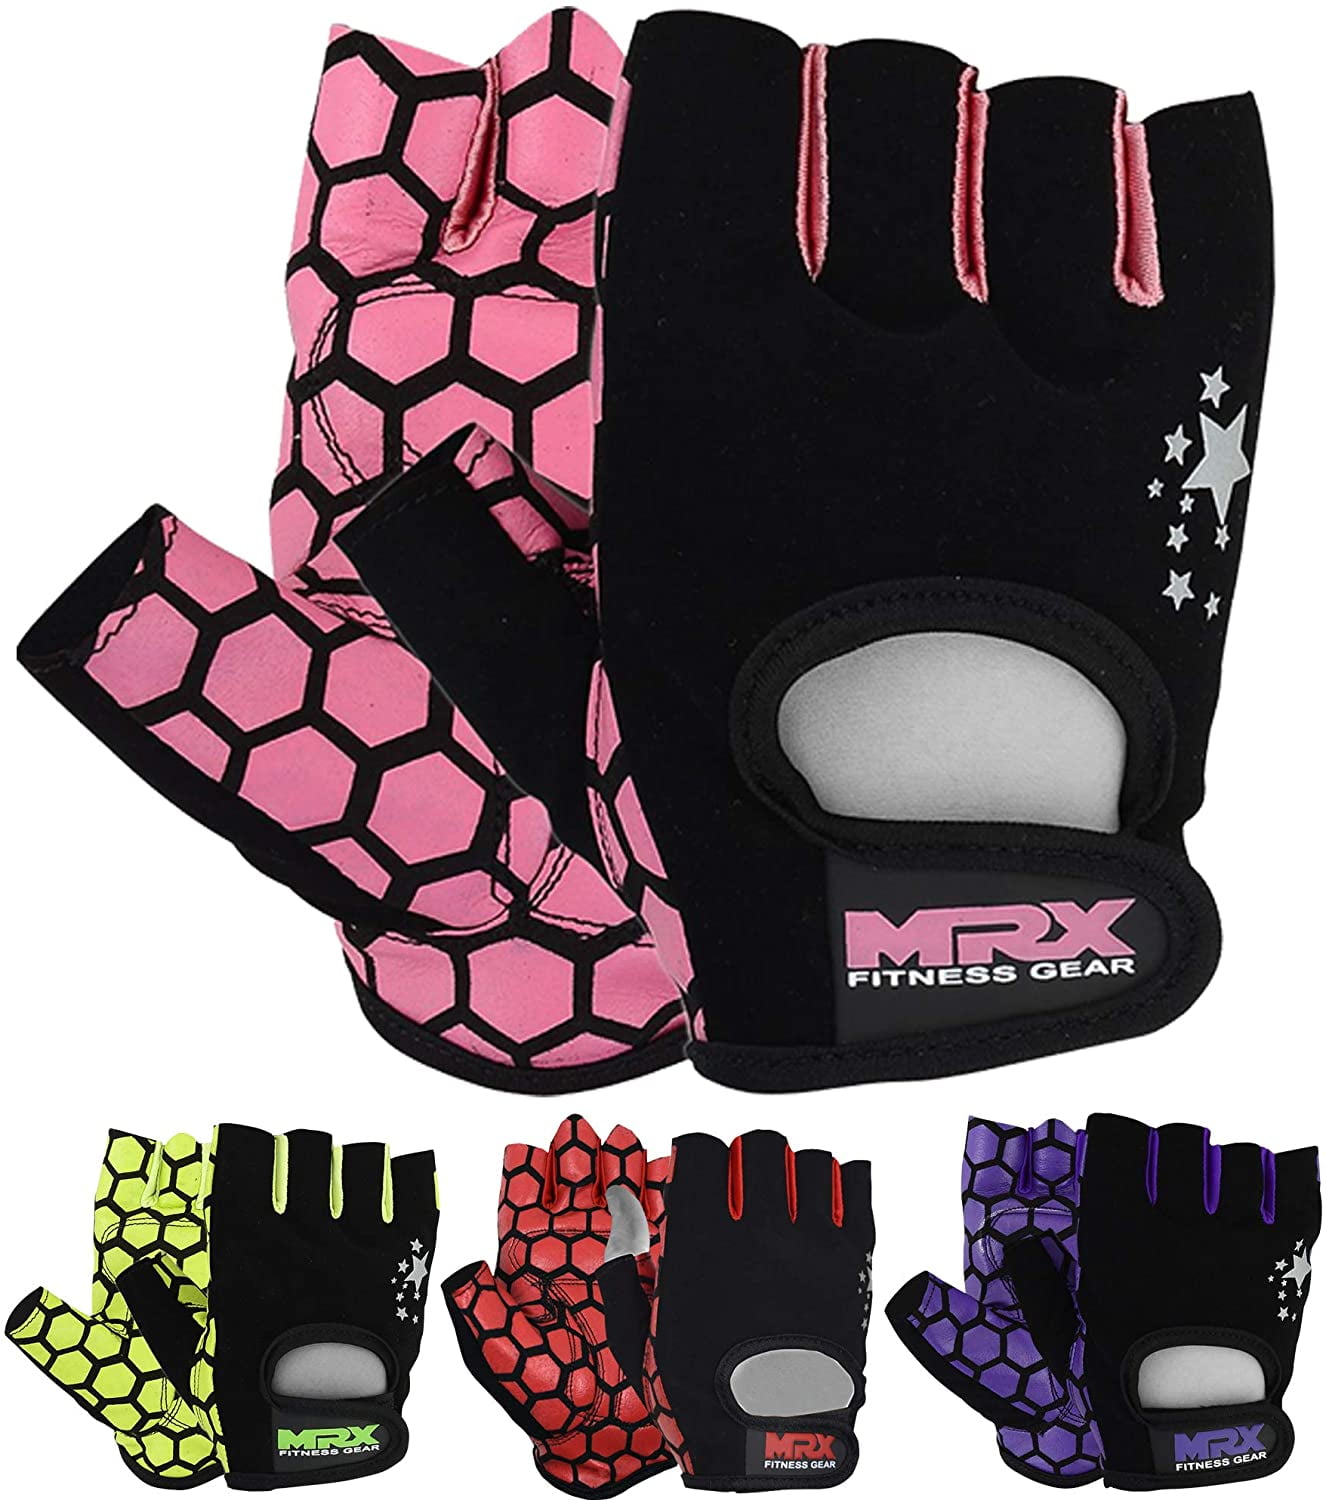 GYM FITNESS GLOVES WOMEN WEIGHT LIFTING BODYBUILDING TRAINING WORKOUT 